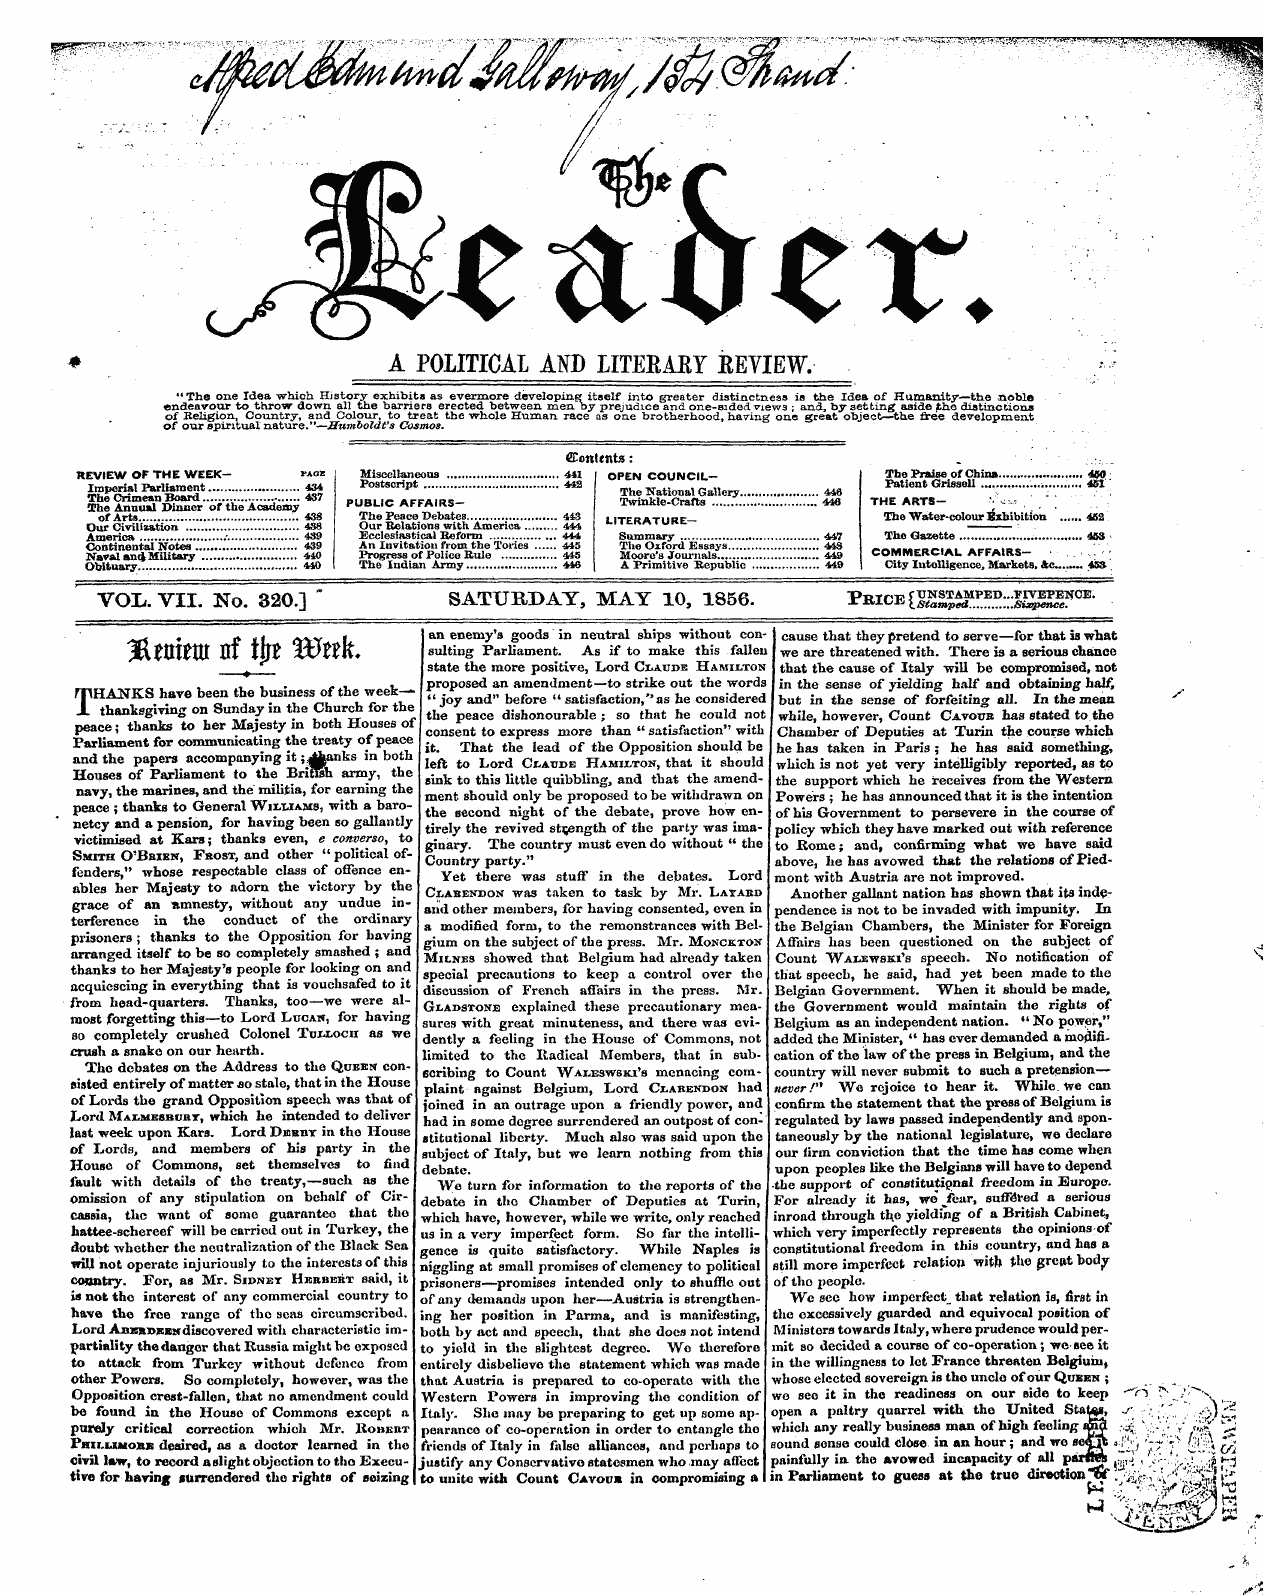 Leader (1850-1860): jS F Y, 1st edition - Untitled Picture